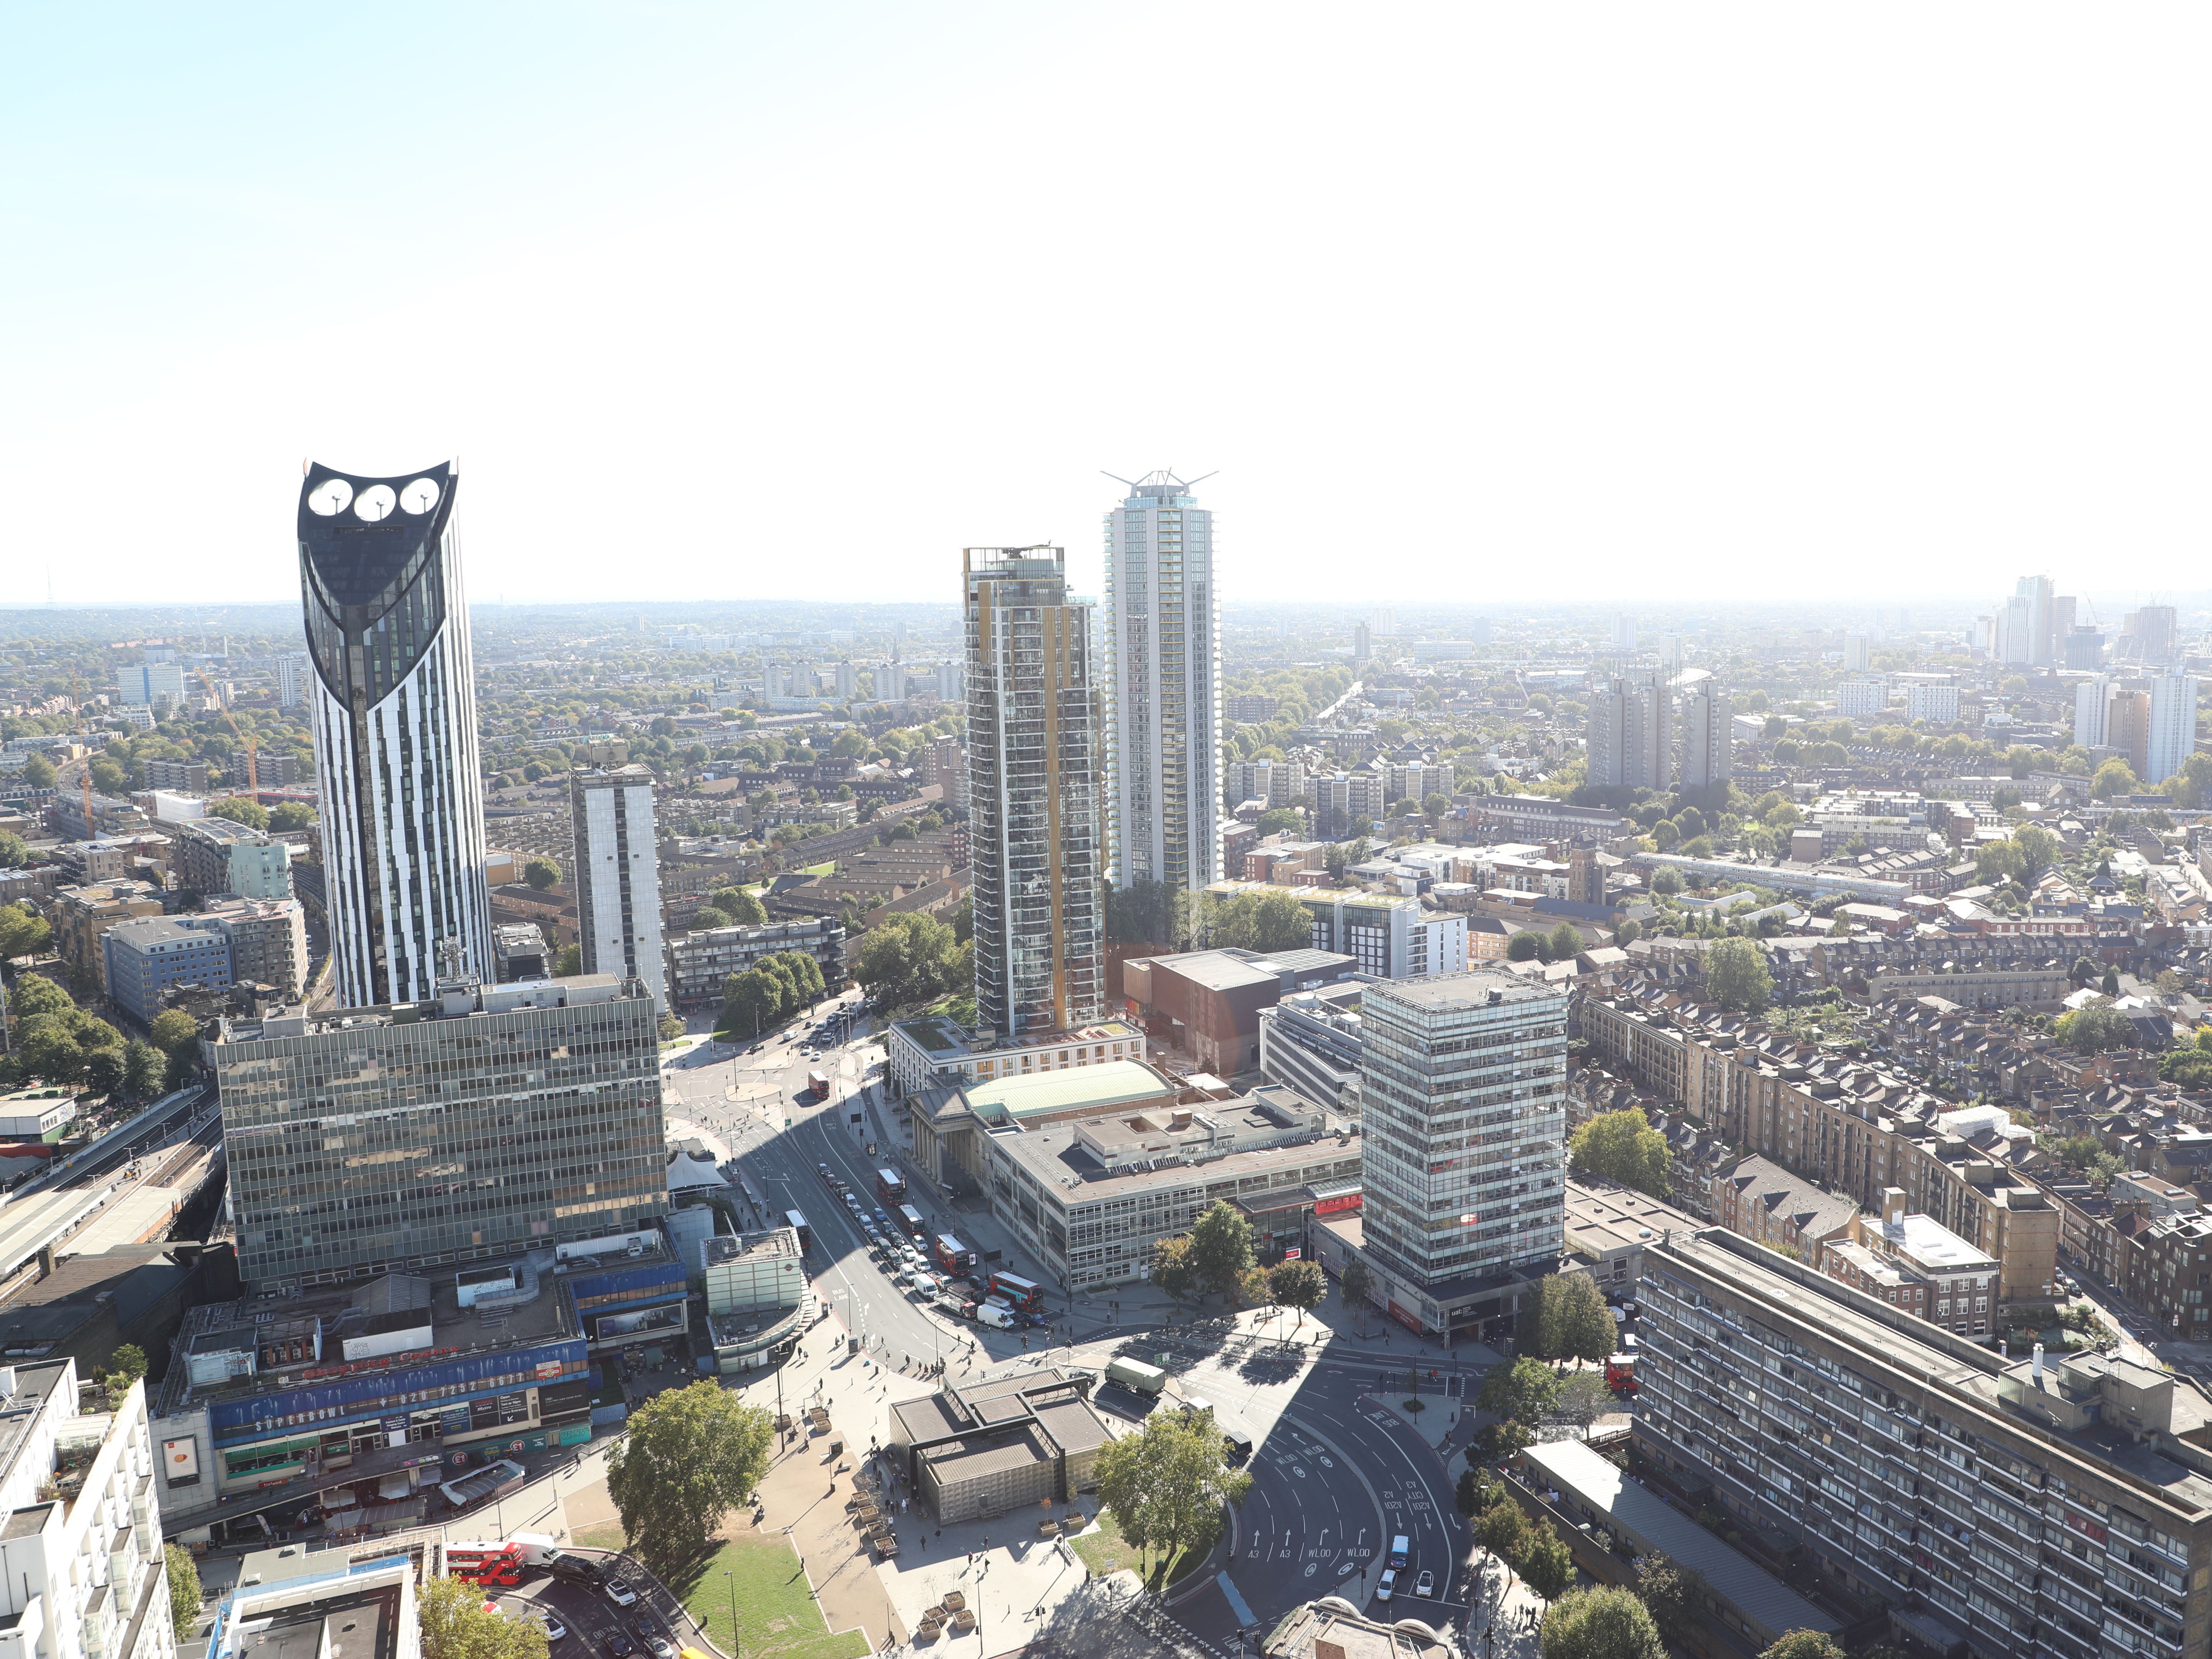 Image of LCC and Elephant and Castle taken from above